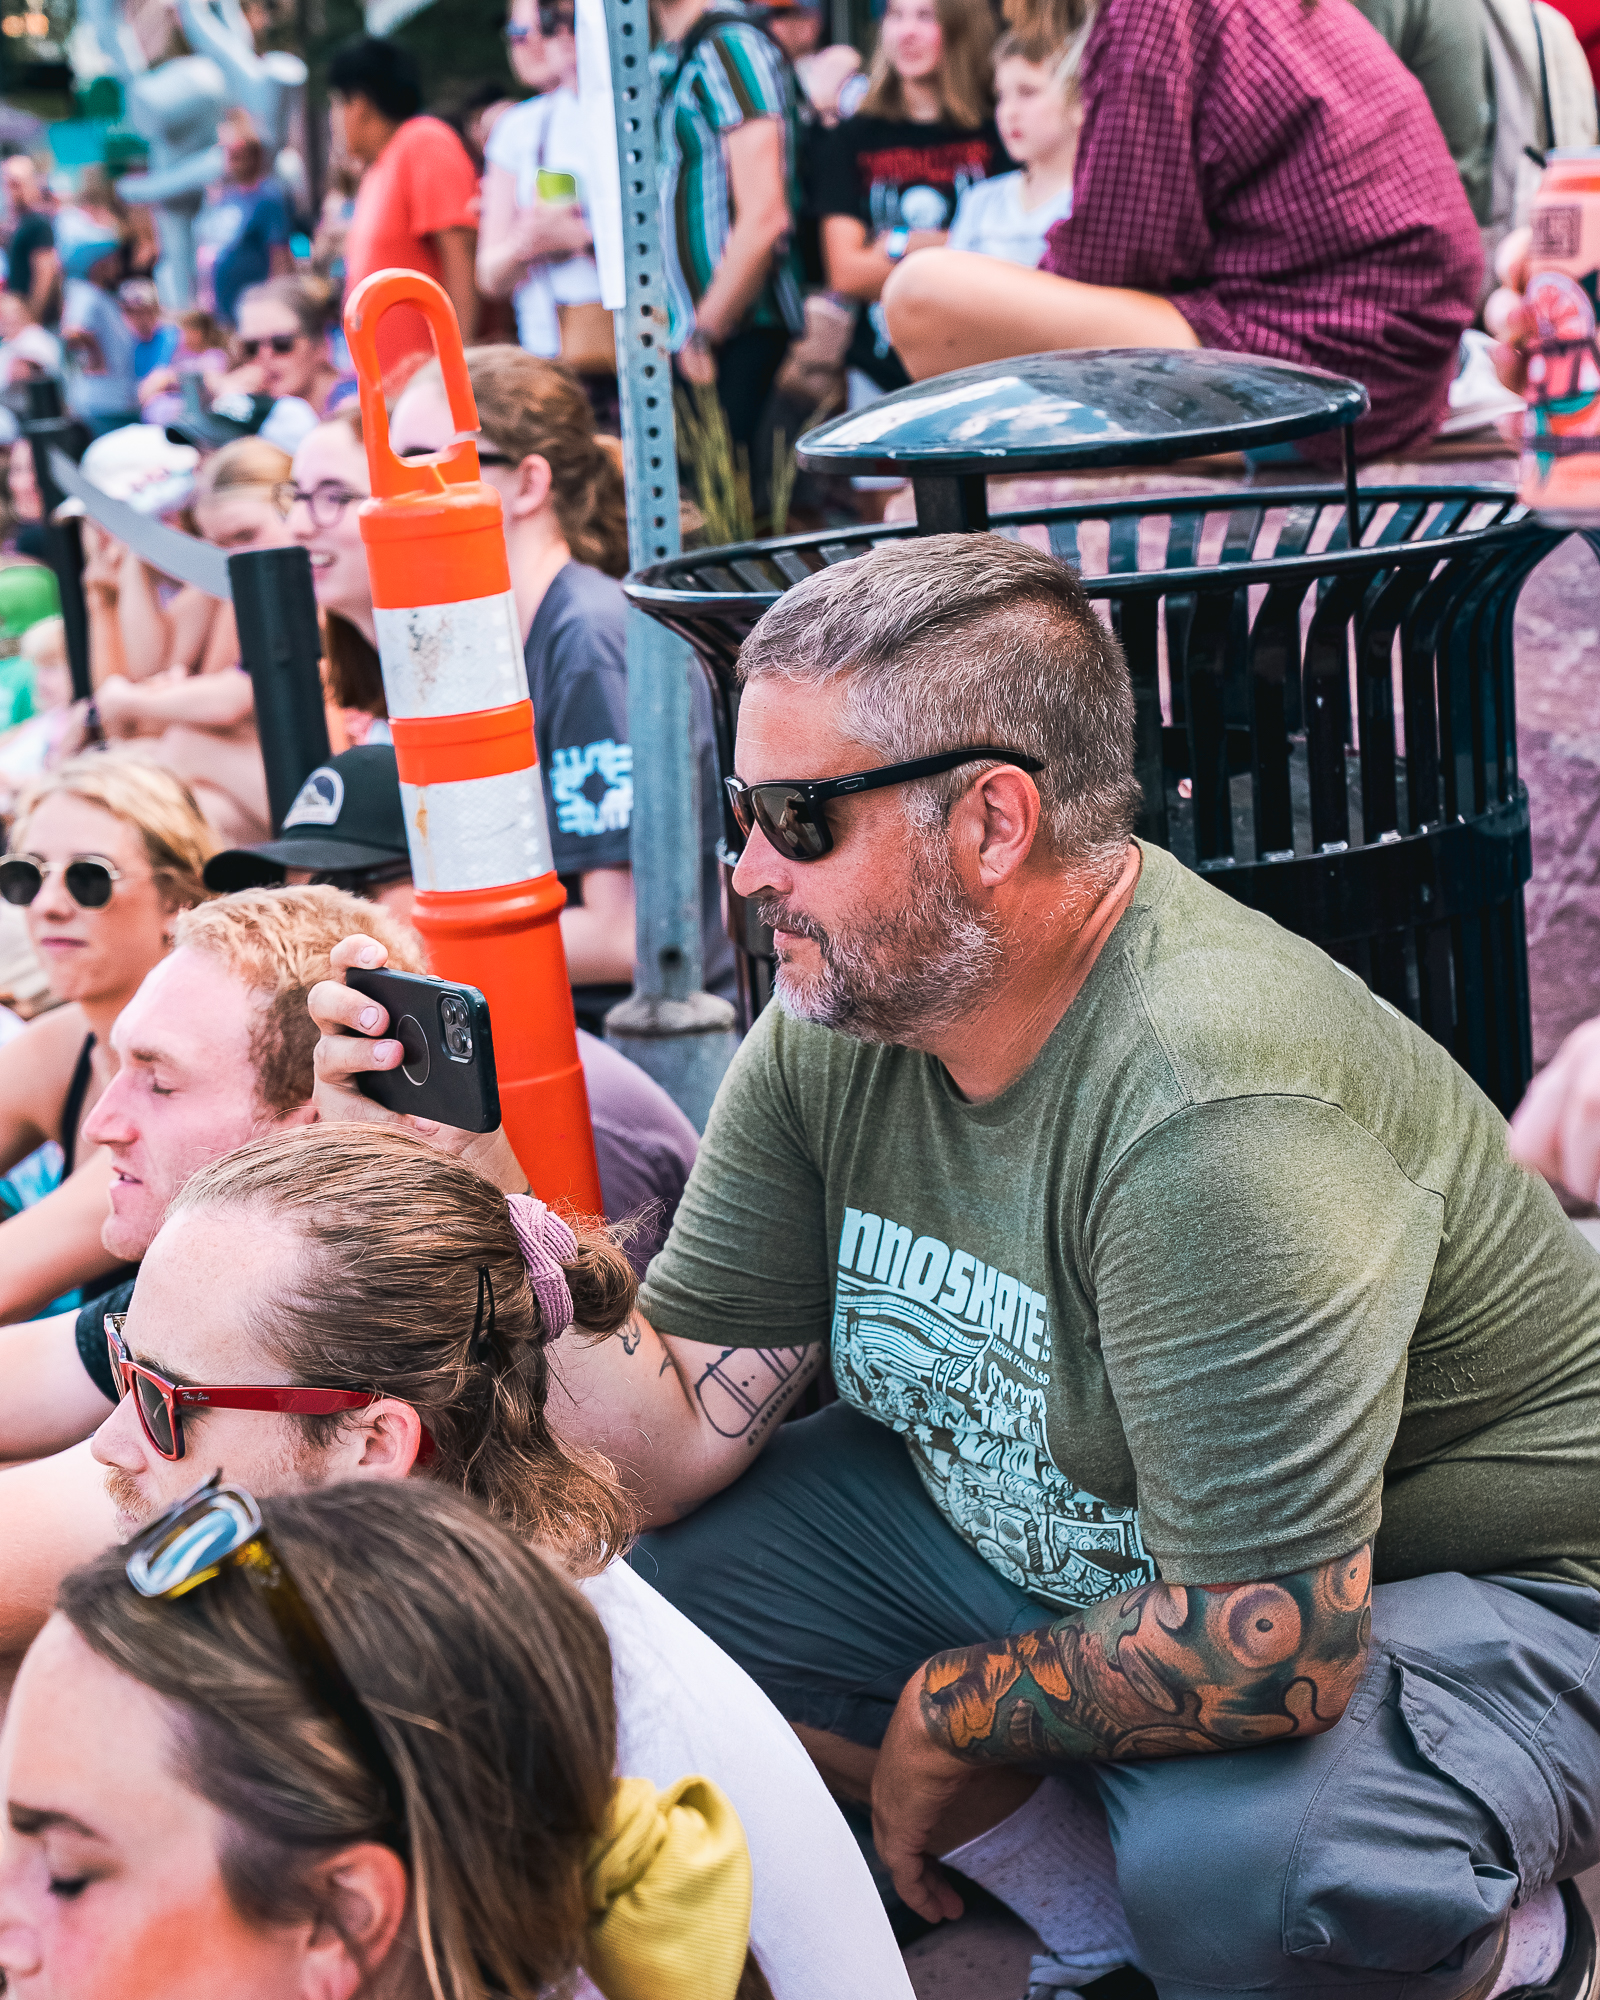 A person wearing black sunglasses squats holding a phone to film a video while surrounded by a crowd of people watching skate contests during Innoskate 2022 in downtown Sioux Falls, SD.